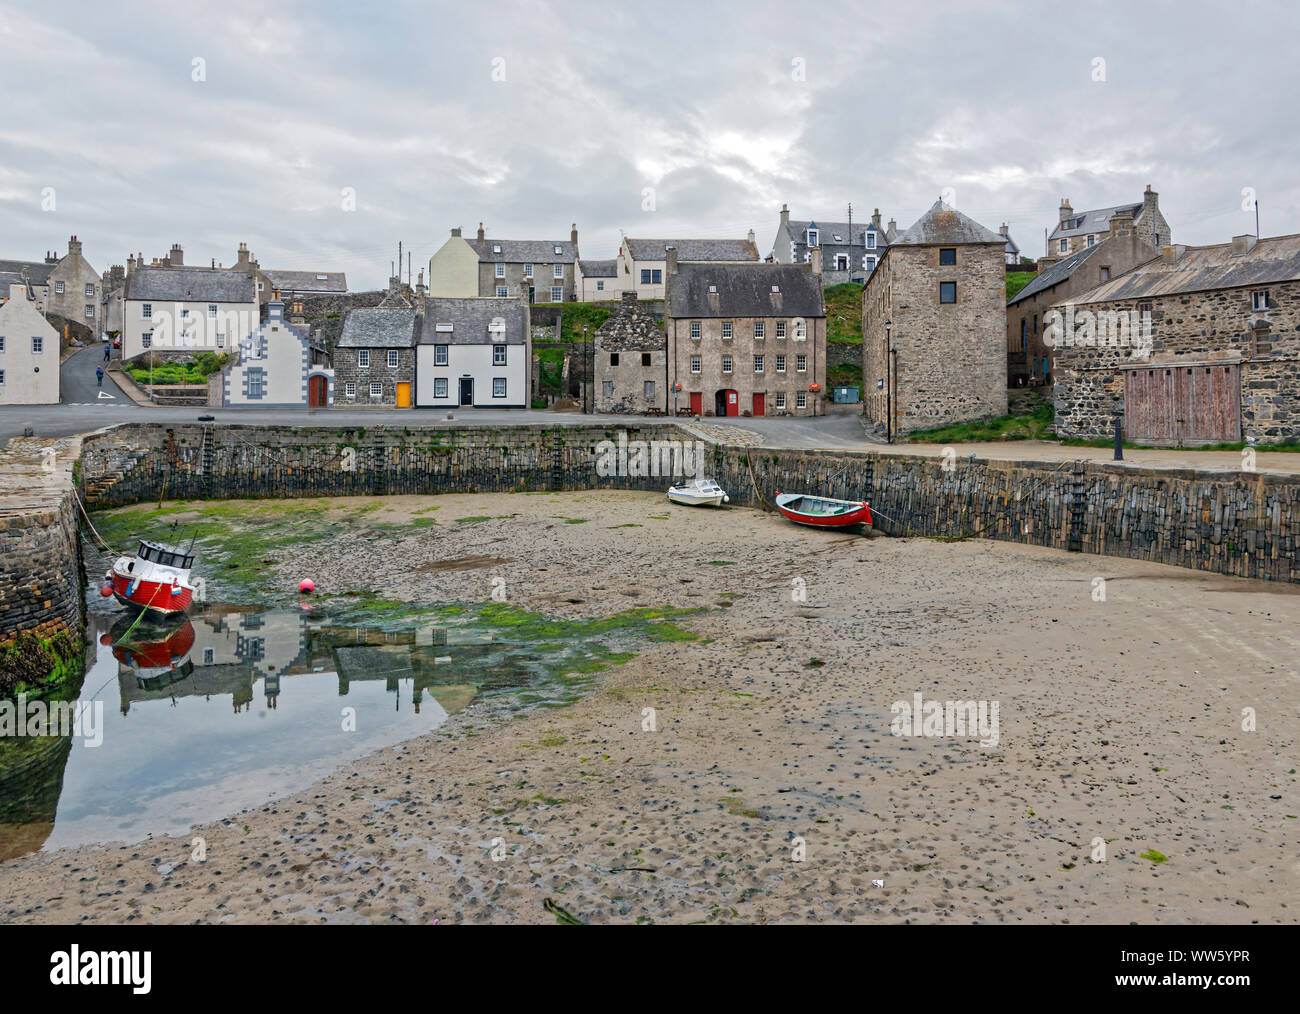 Great Britain, Scotland, Aberdeenshire, Banffshire, Portsoy, harbour, fall dry, boats, reflections Stock Photo